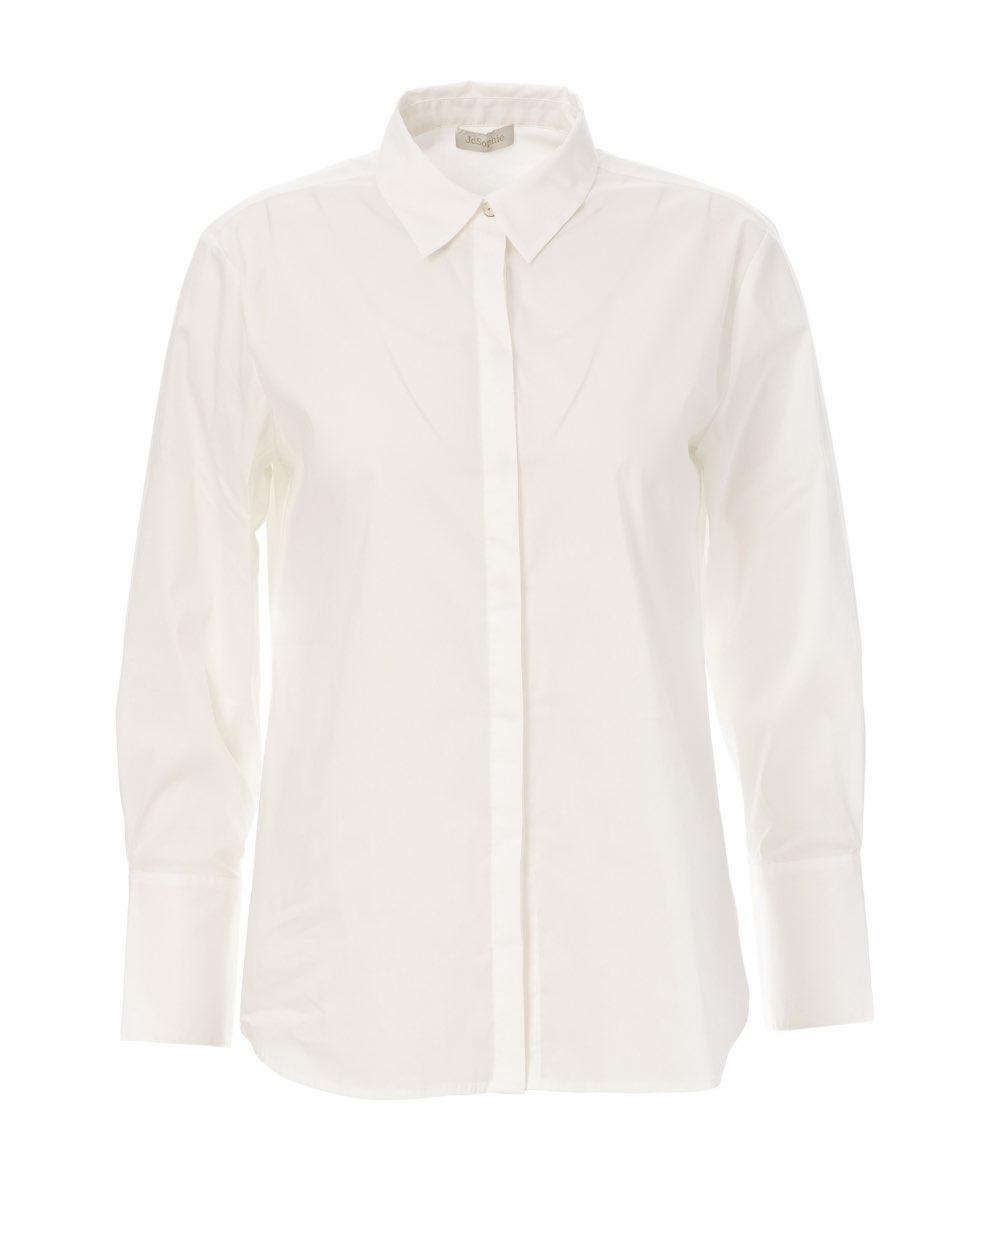 JcSophie Simple Blouse Off White